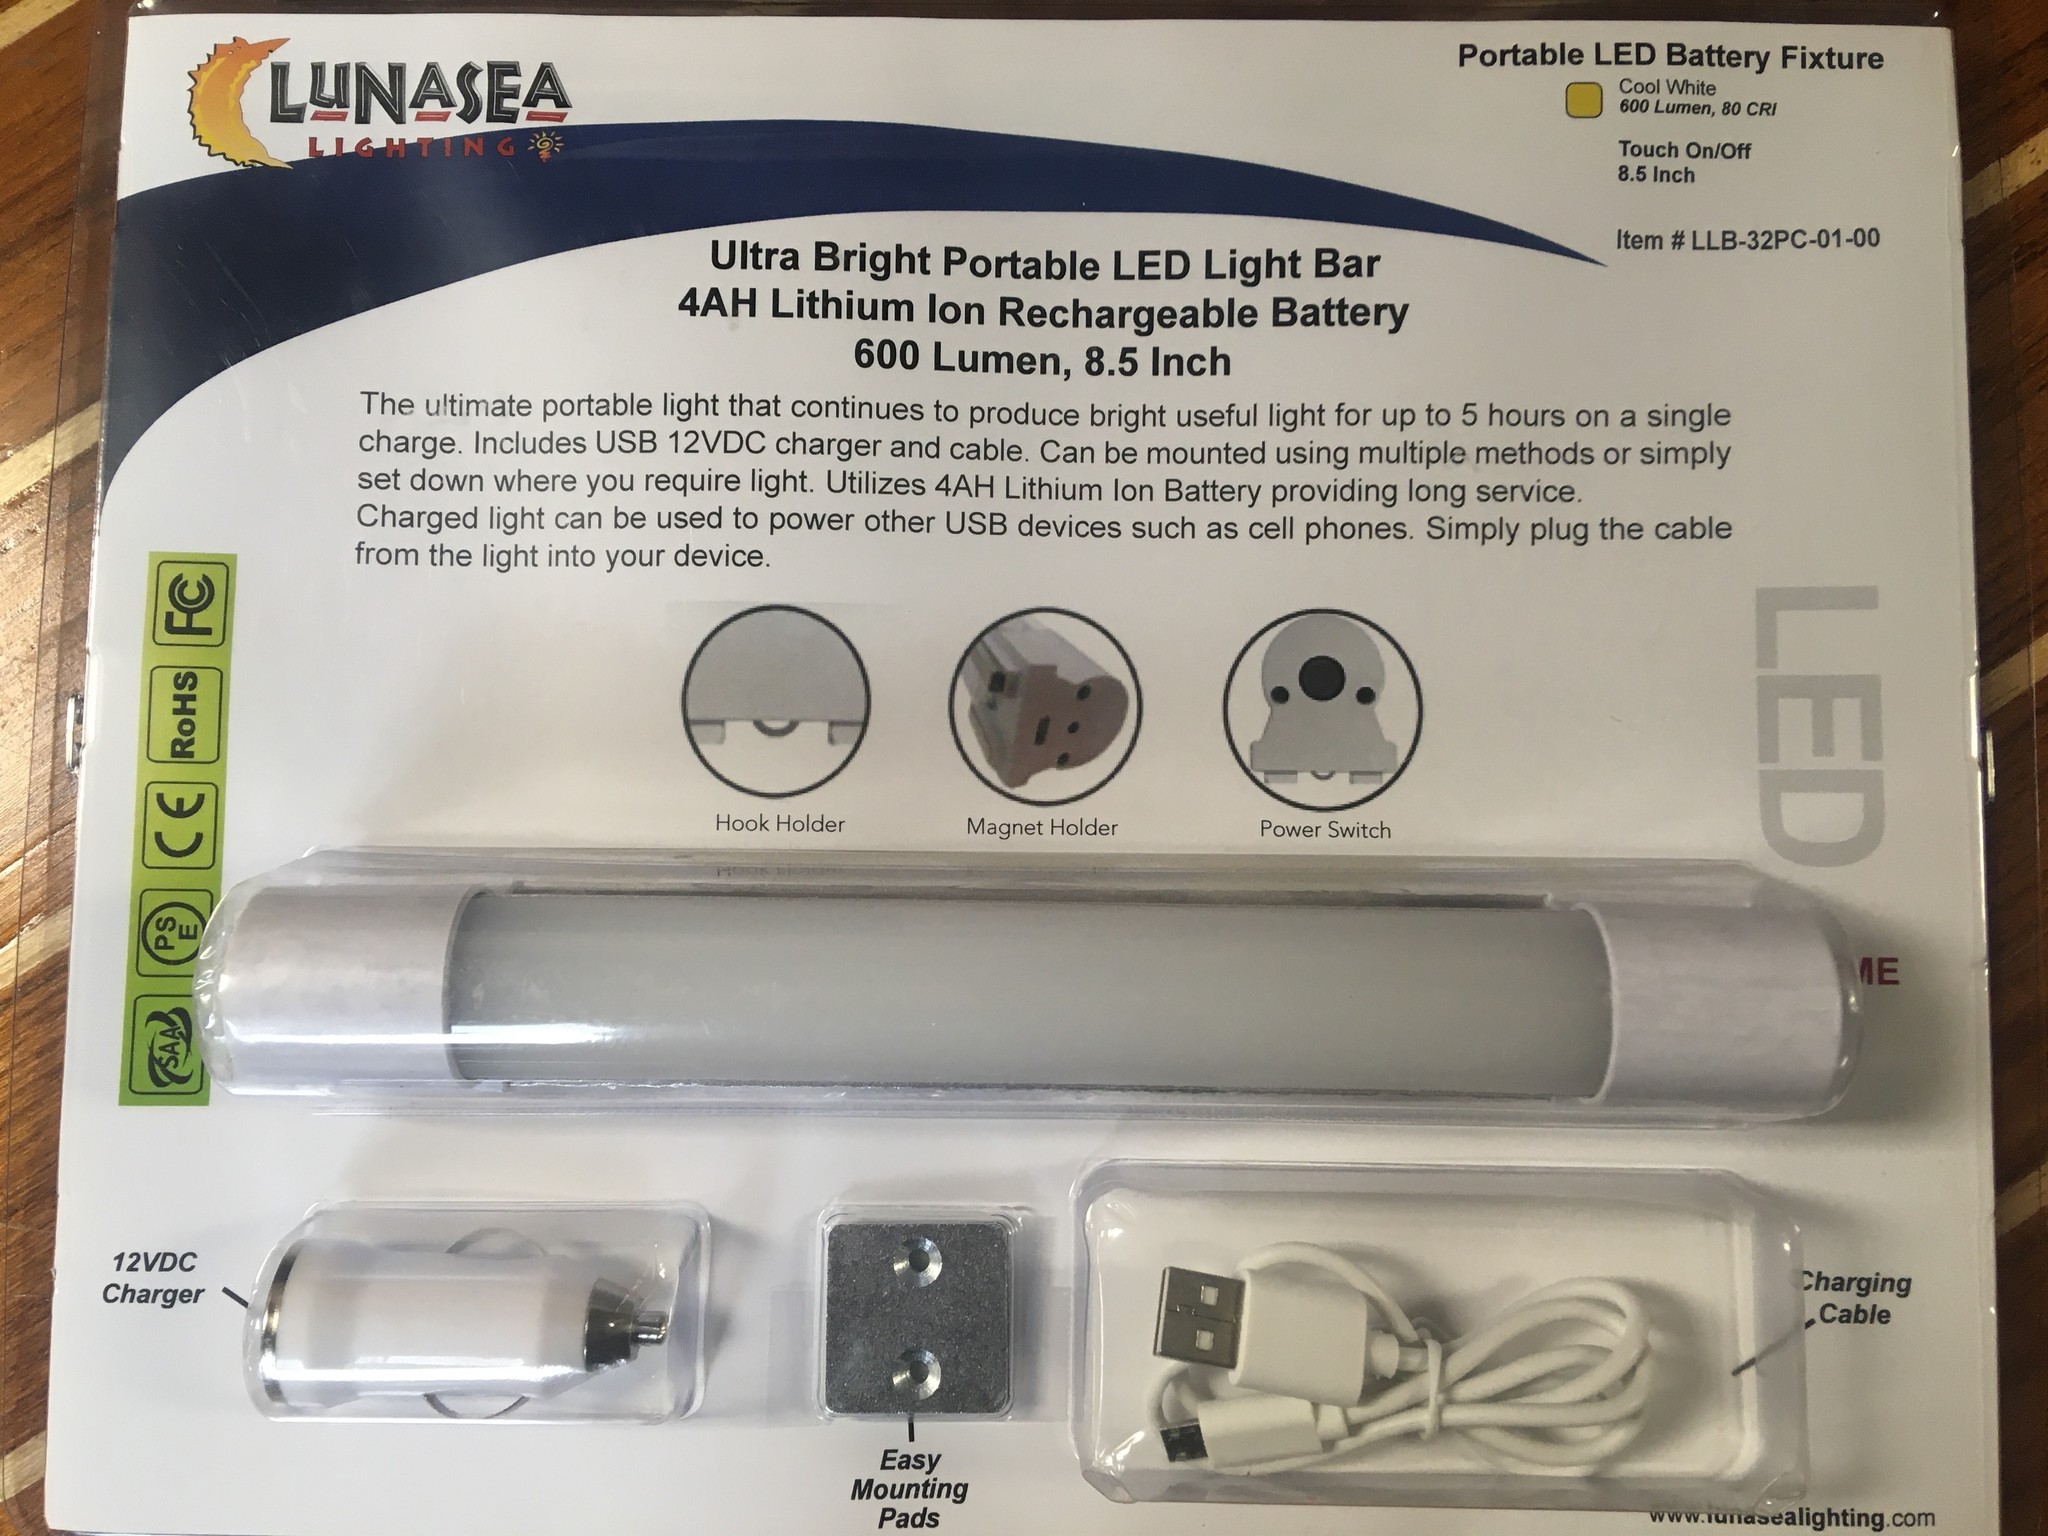 LUNASEA LUNASEA PORTABLE LED RECHARGEABLE LIGHT BAR W/ HOOK & MAGNET (ALSO CHARGES USB DEVICES) *NEW*